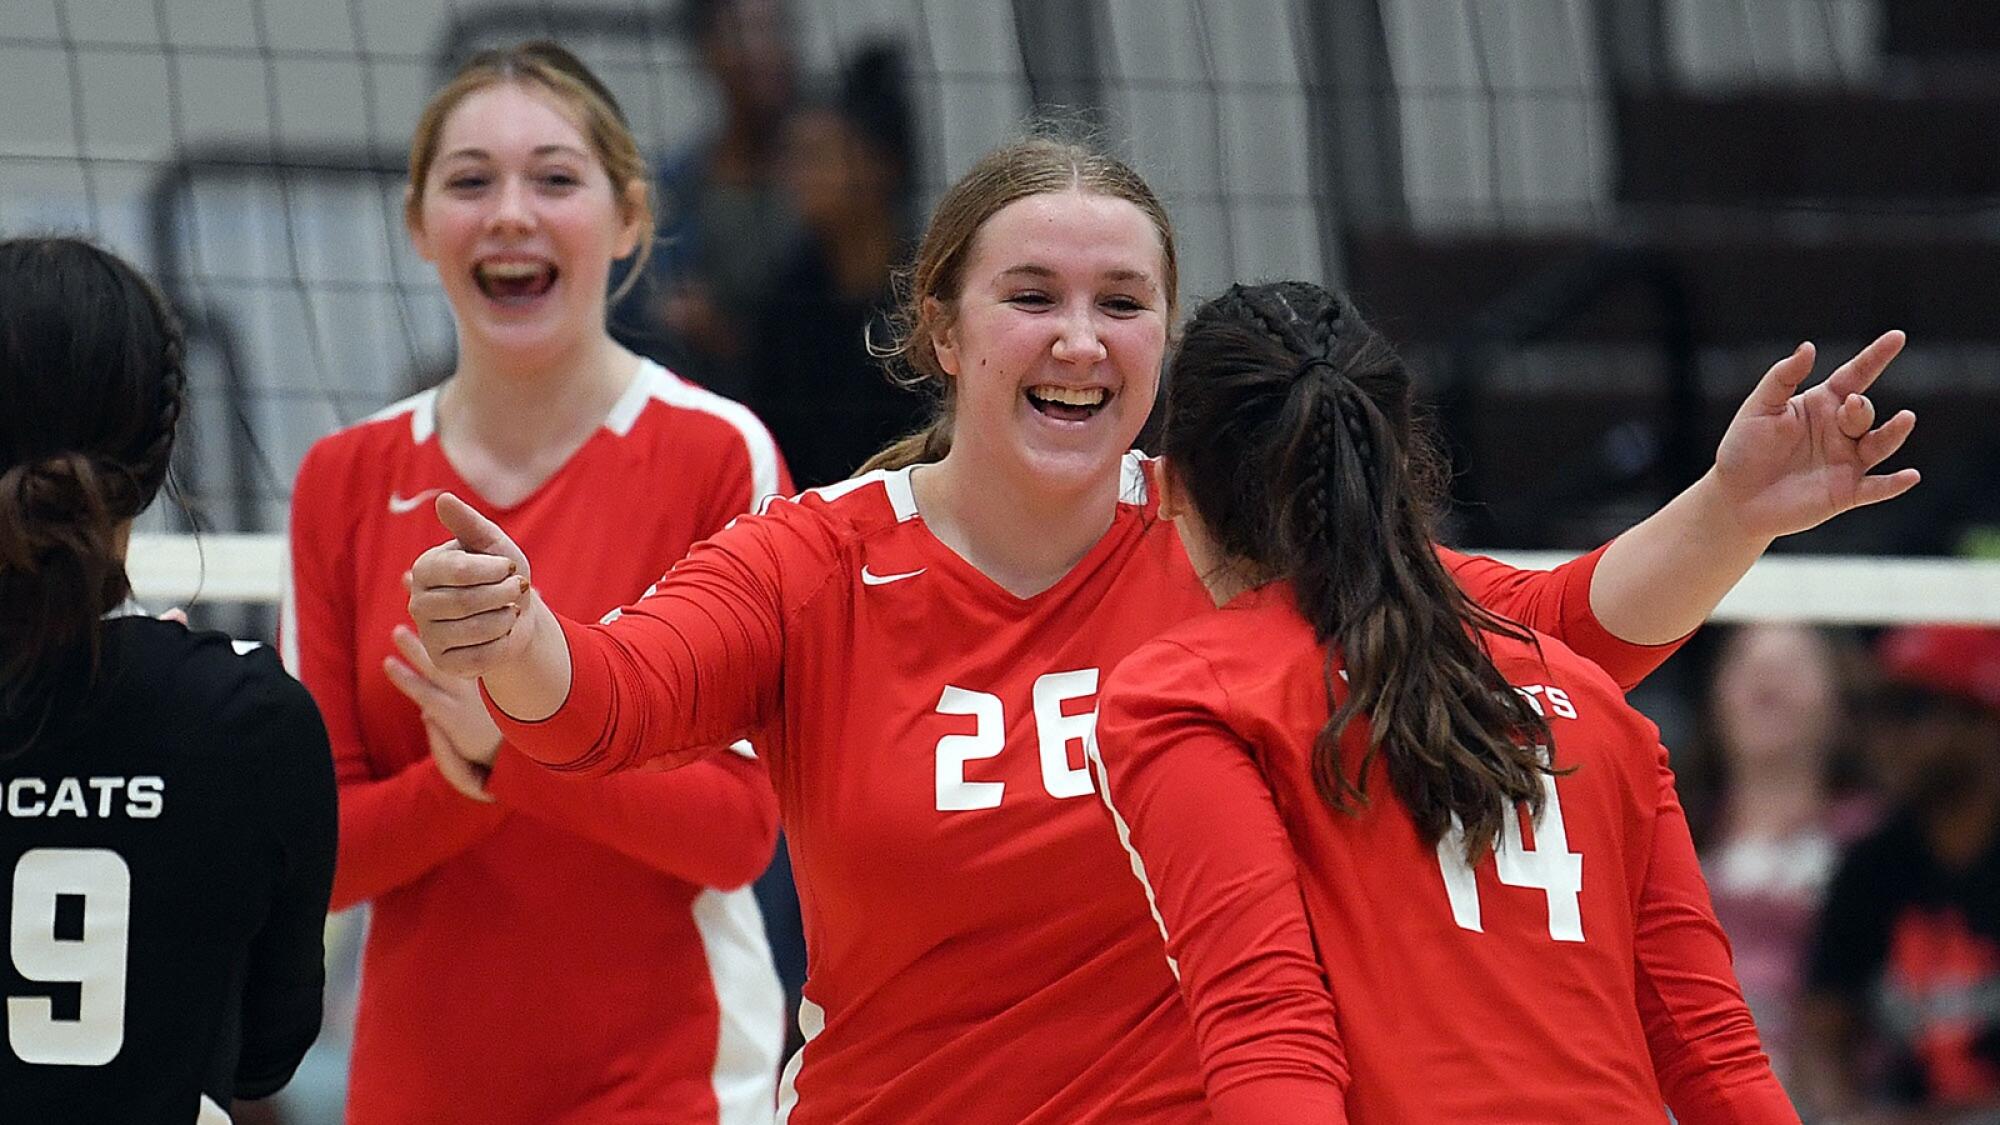 NFA rolls to three set win over New London in girls volleyball